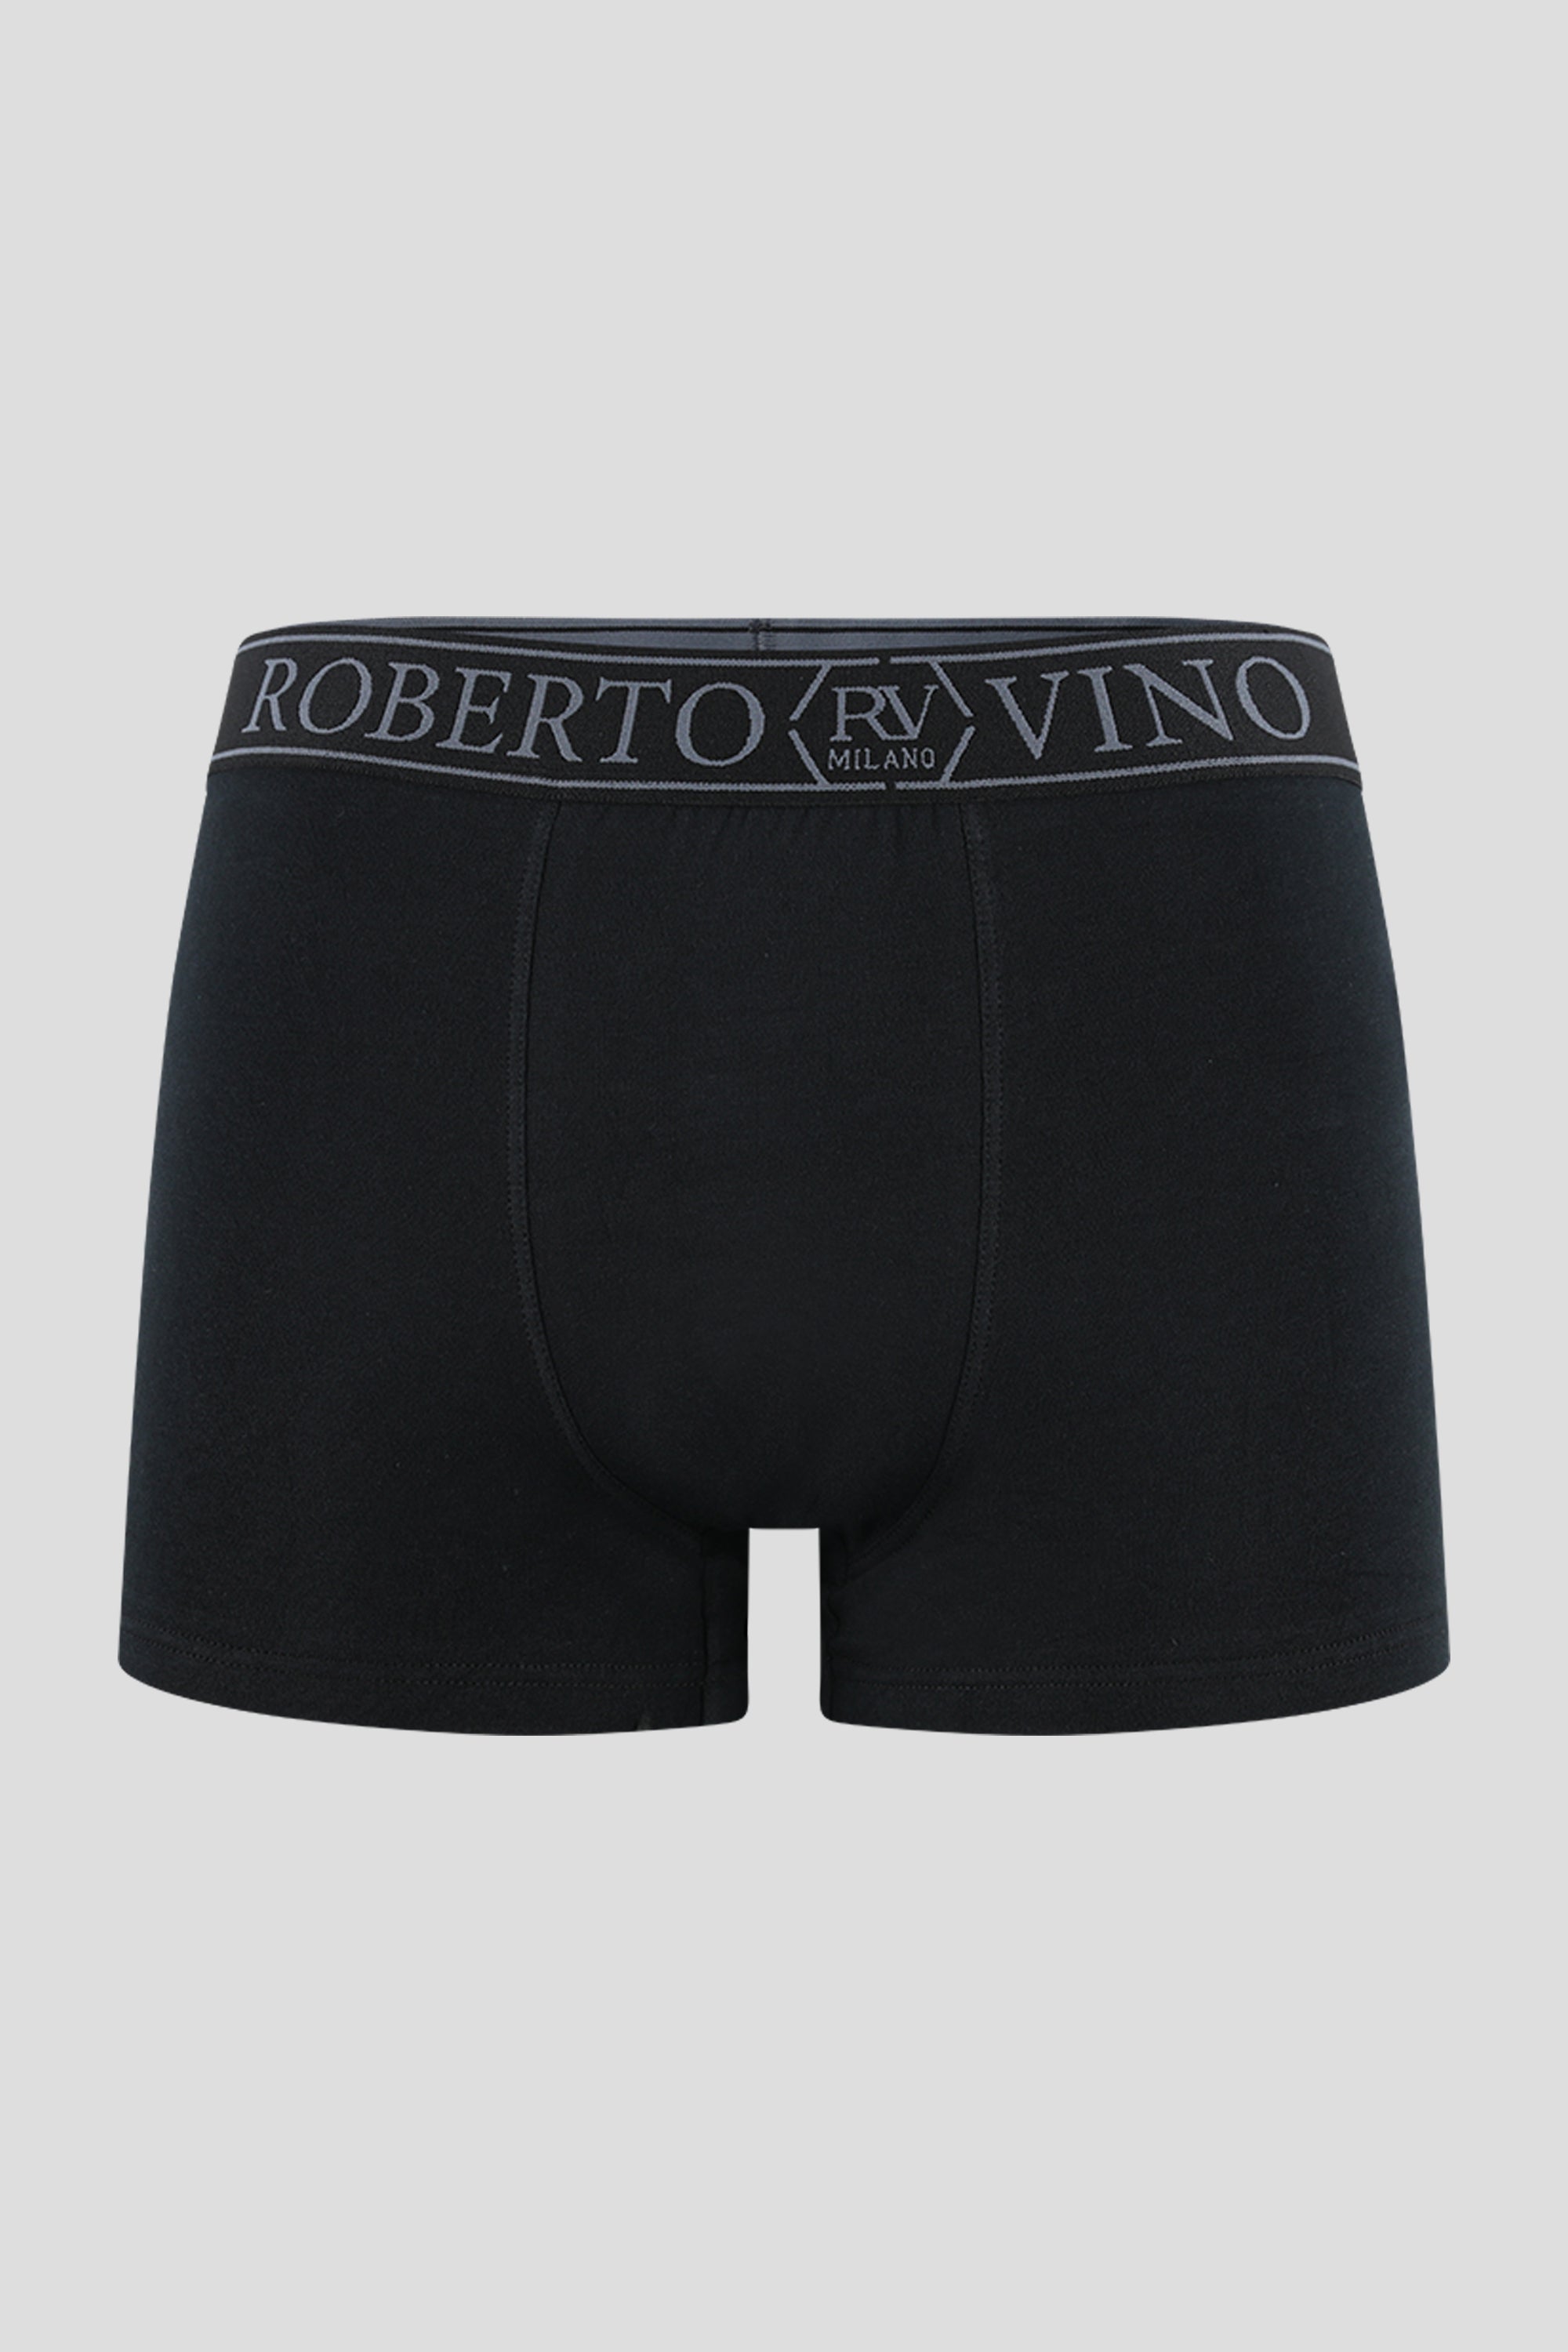 MILANO 3 pack boxers